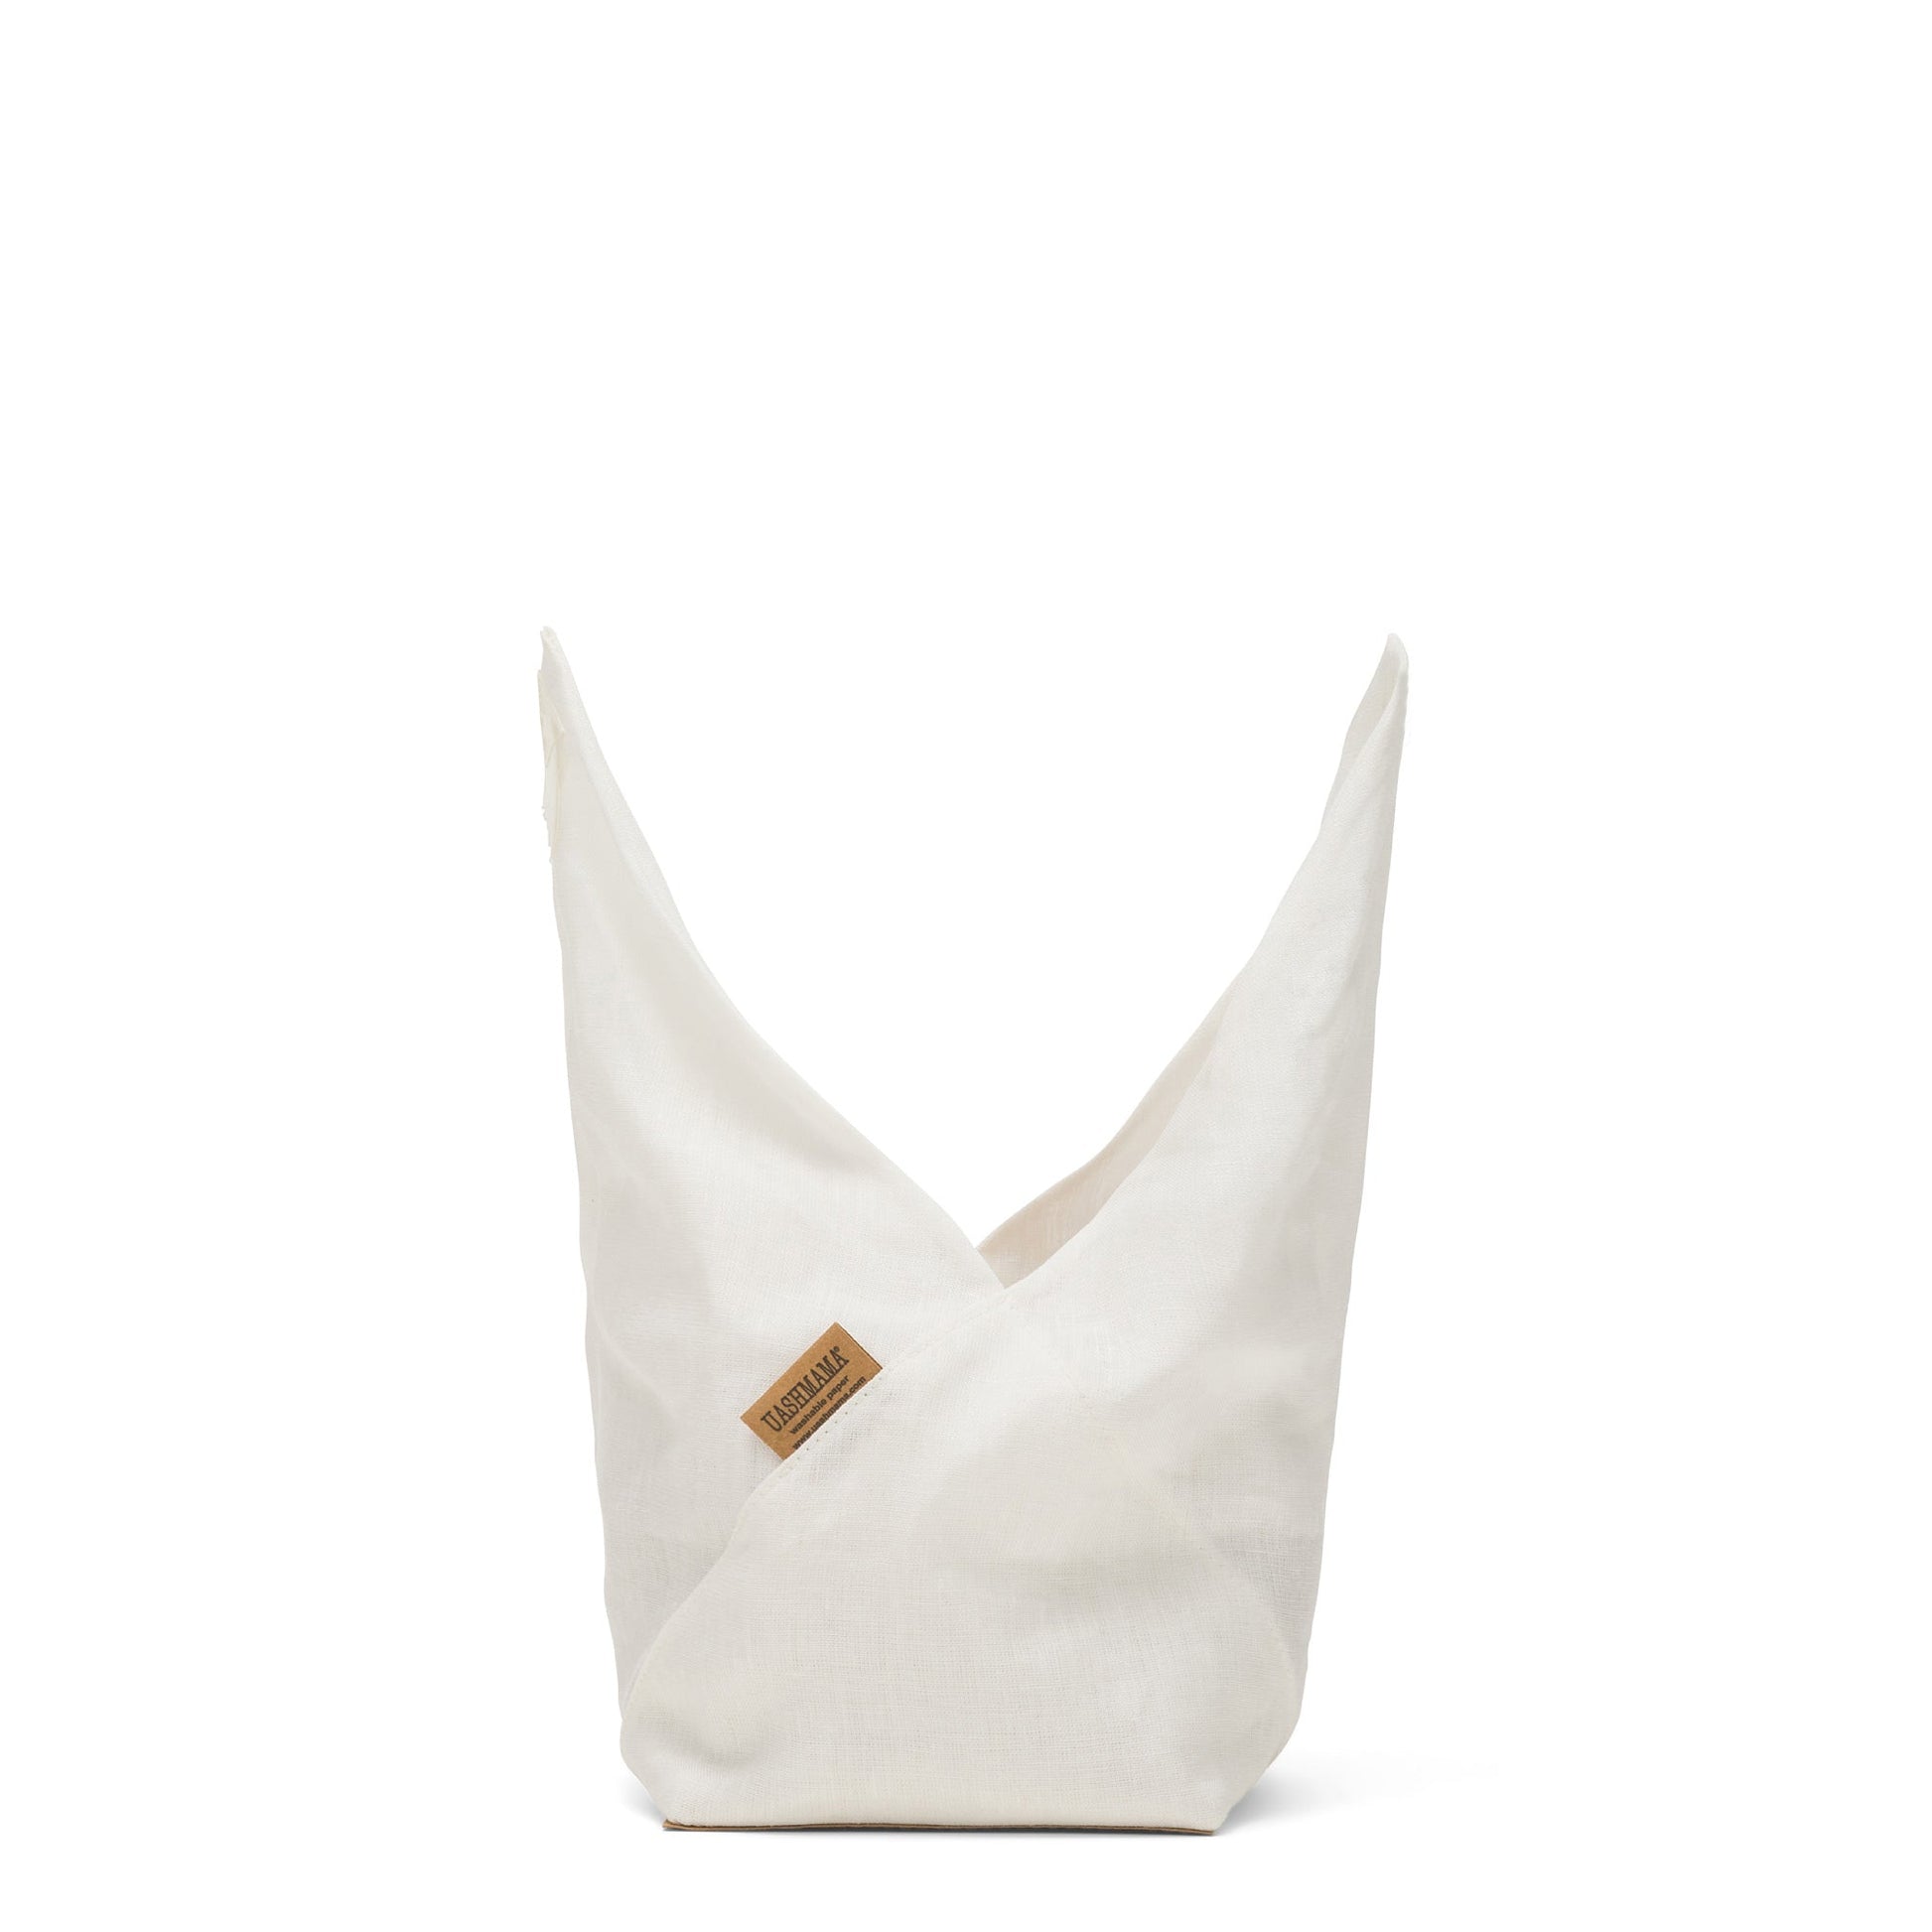 A white linen bread bag is shown with the top fully unrolled into two skyward points. A tan UASHMAMA logo tag is shown at the front.